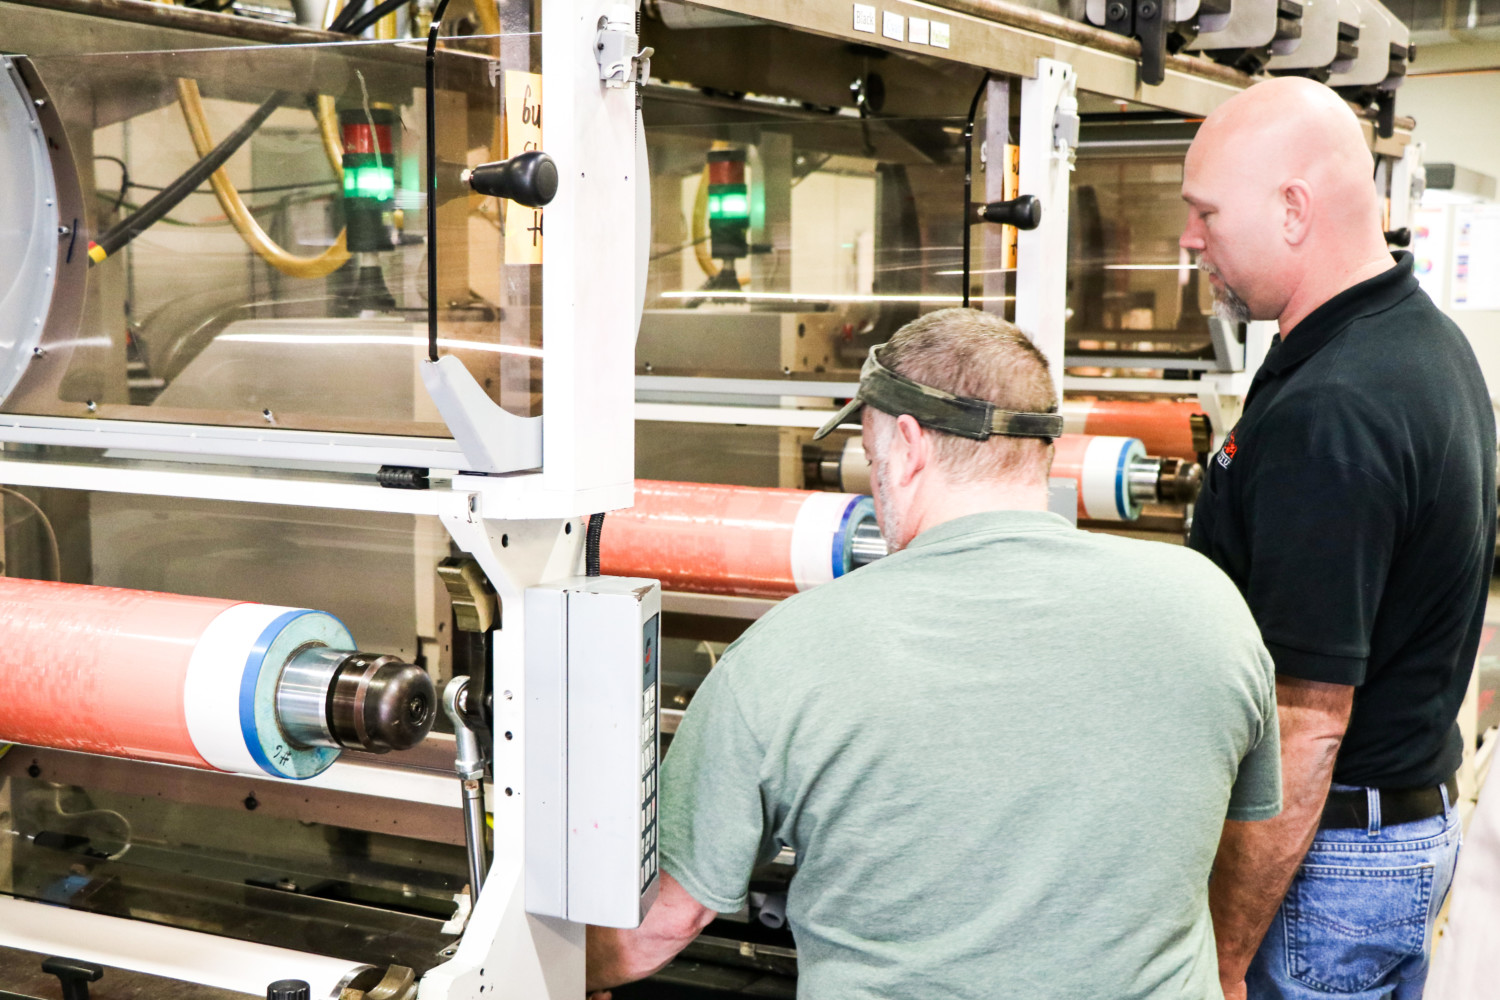 Course participants can get hands-on experience with the flexographic press at the Sonoco Institute of Packaging Design and Graphics at Clemson University. (Photo/Provided)